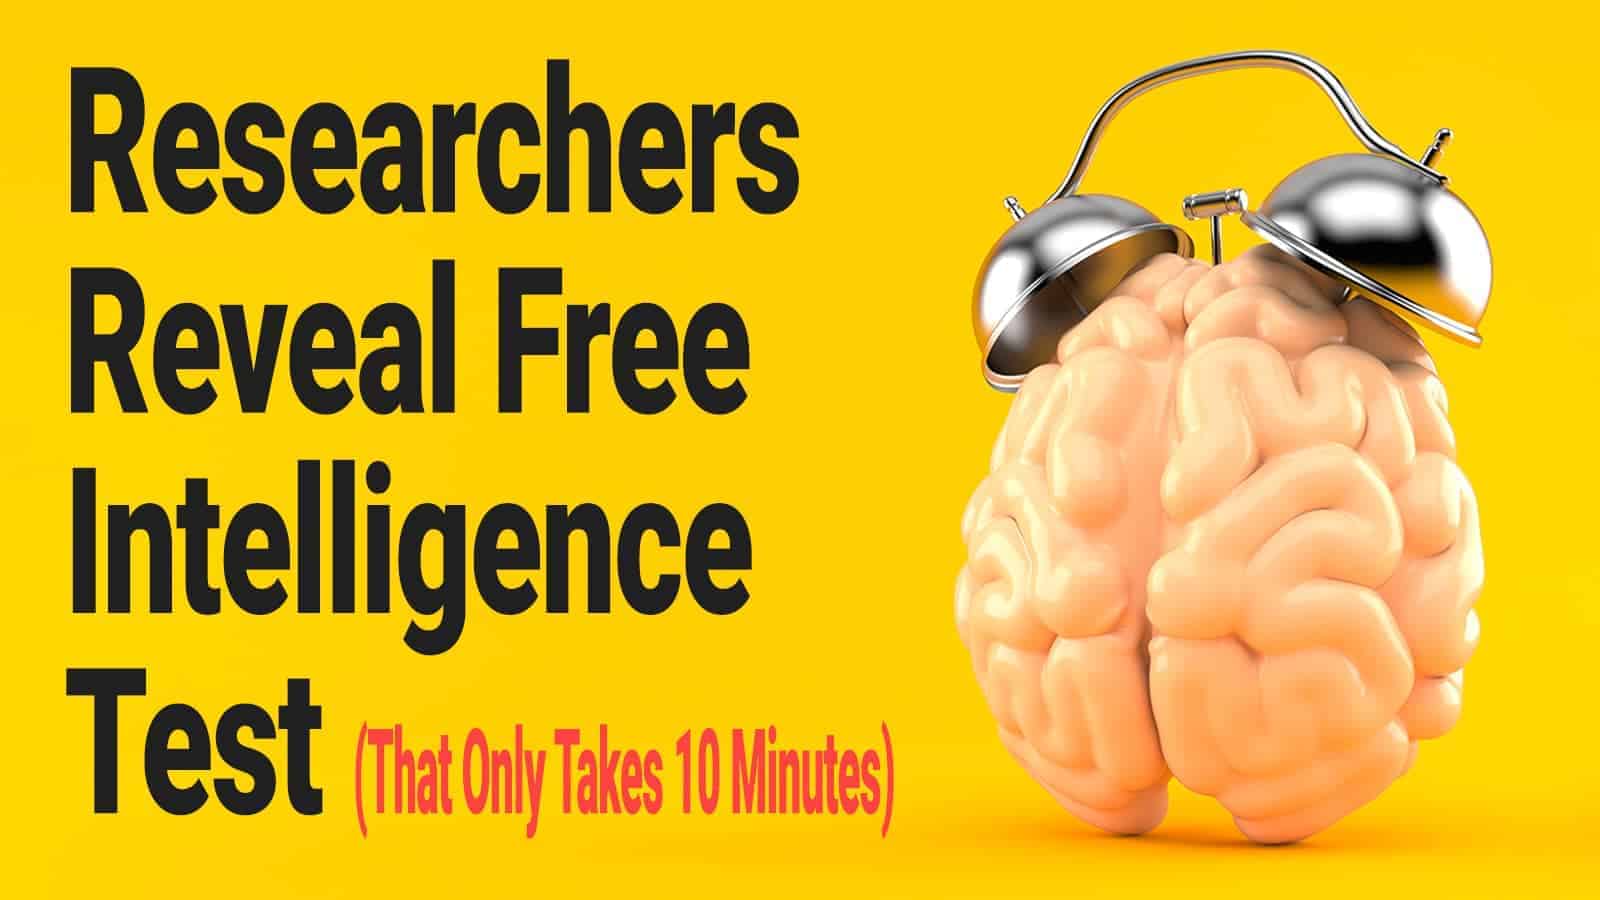 Researchers Reveal Free Intelligence Test (That Only Takes 10 Minutes)